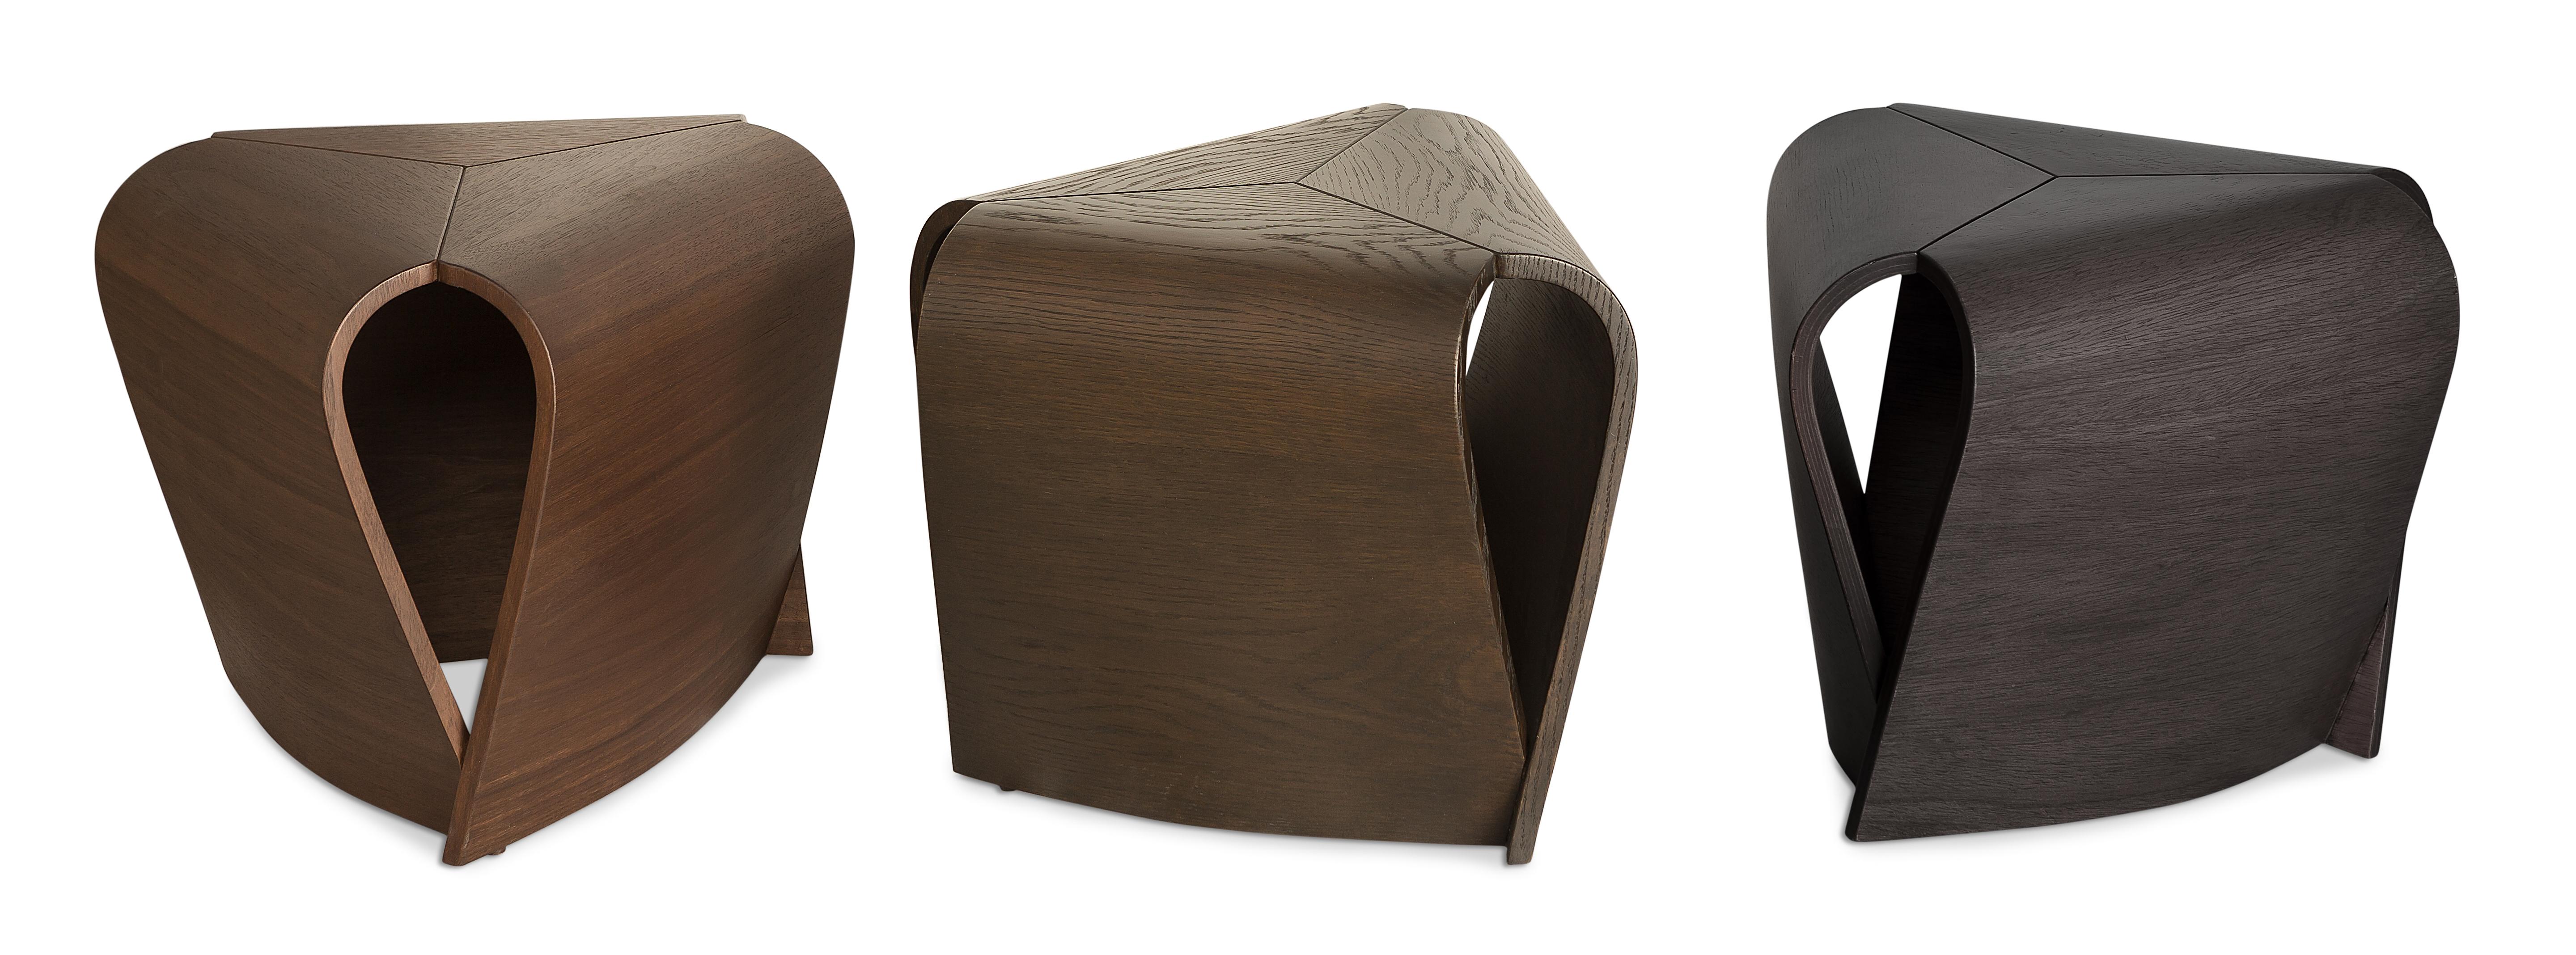 Inspired by the Tulip Era of the Ottoman Empire, the ‘Tulip Collection’ stands out with its eye-catching aesthetics. A new detail can be discovered from every angle of our ‘Tulip Side Table’ that’s created by 3 identical sculptural forms made of